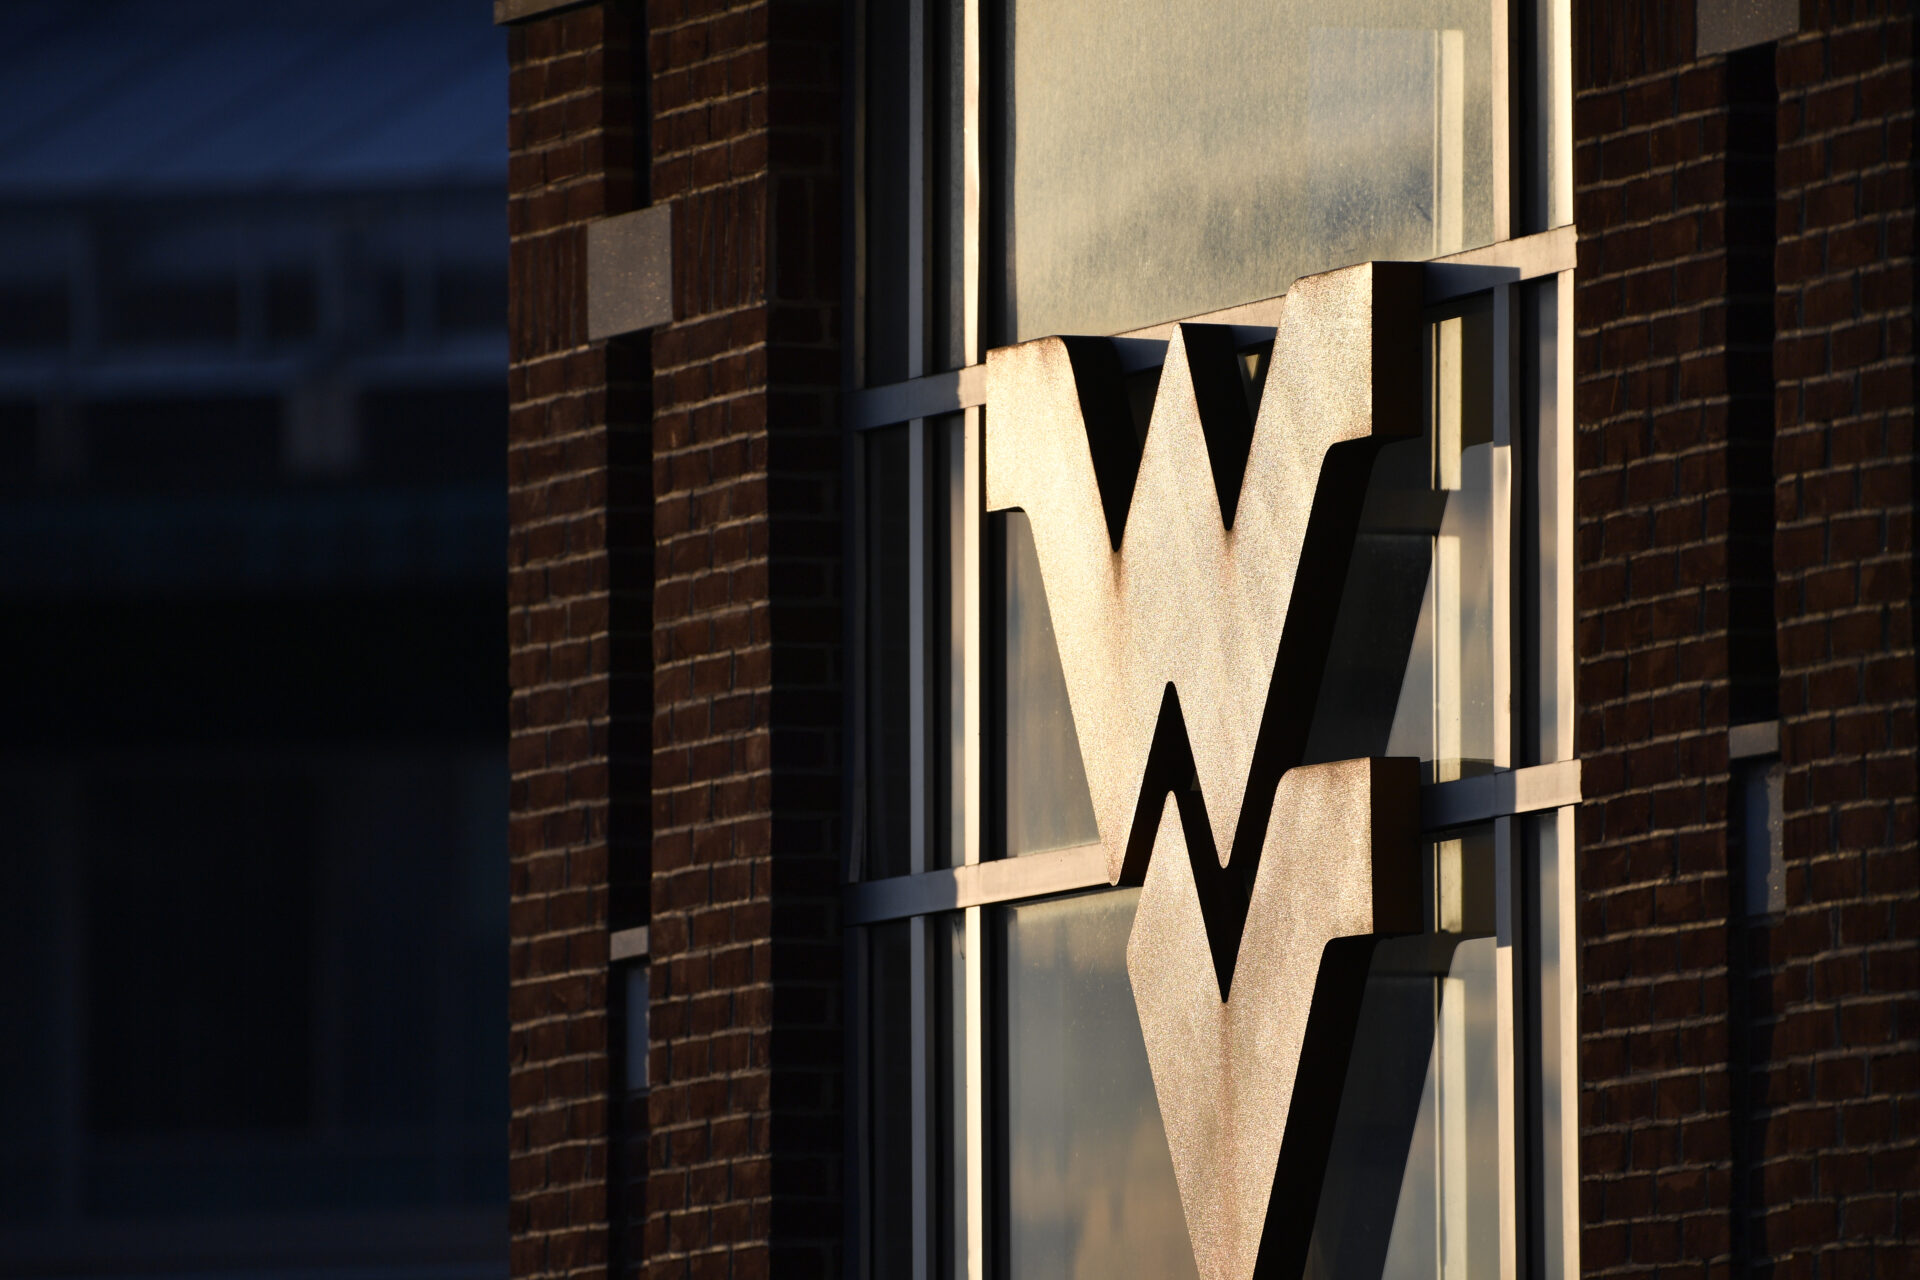 A West Virginia University logo, known as the "Flying WV" can be seen on the facade of a building. The letters are lit up by sunlight.